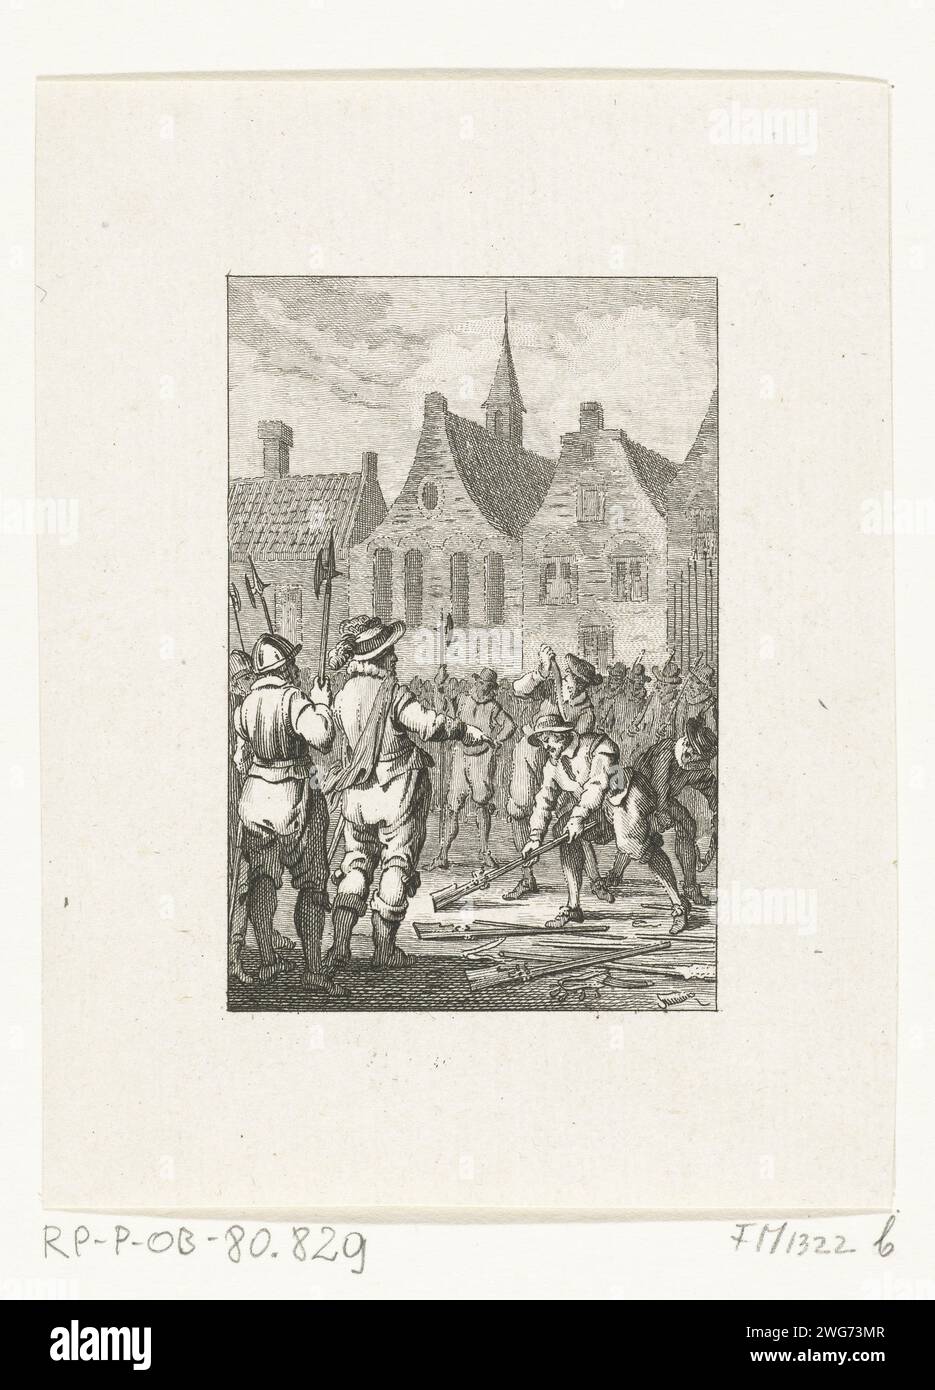 The disposal of the Waardgelders in Utrecht, 1618, 1780 - 1795 print The disposal of the Waardgelders on the command of Prince Maurits, on the Neude in Utrecht, July 31, 1618. The soldiers put their weapons on the ground at the feet of Prince Maurits. Netherlands paper etching assembling of military forces; mobilization, troop concentration, etc.. warfare; military affairs (+ mercenary troops, e.g.: lansquenets). demobilization Neud Stock Photo